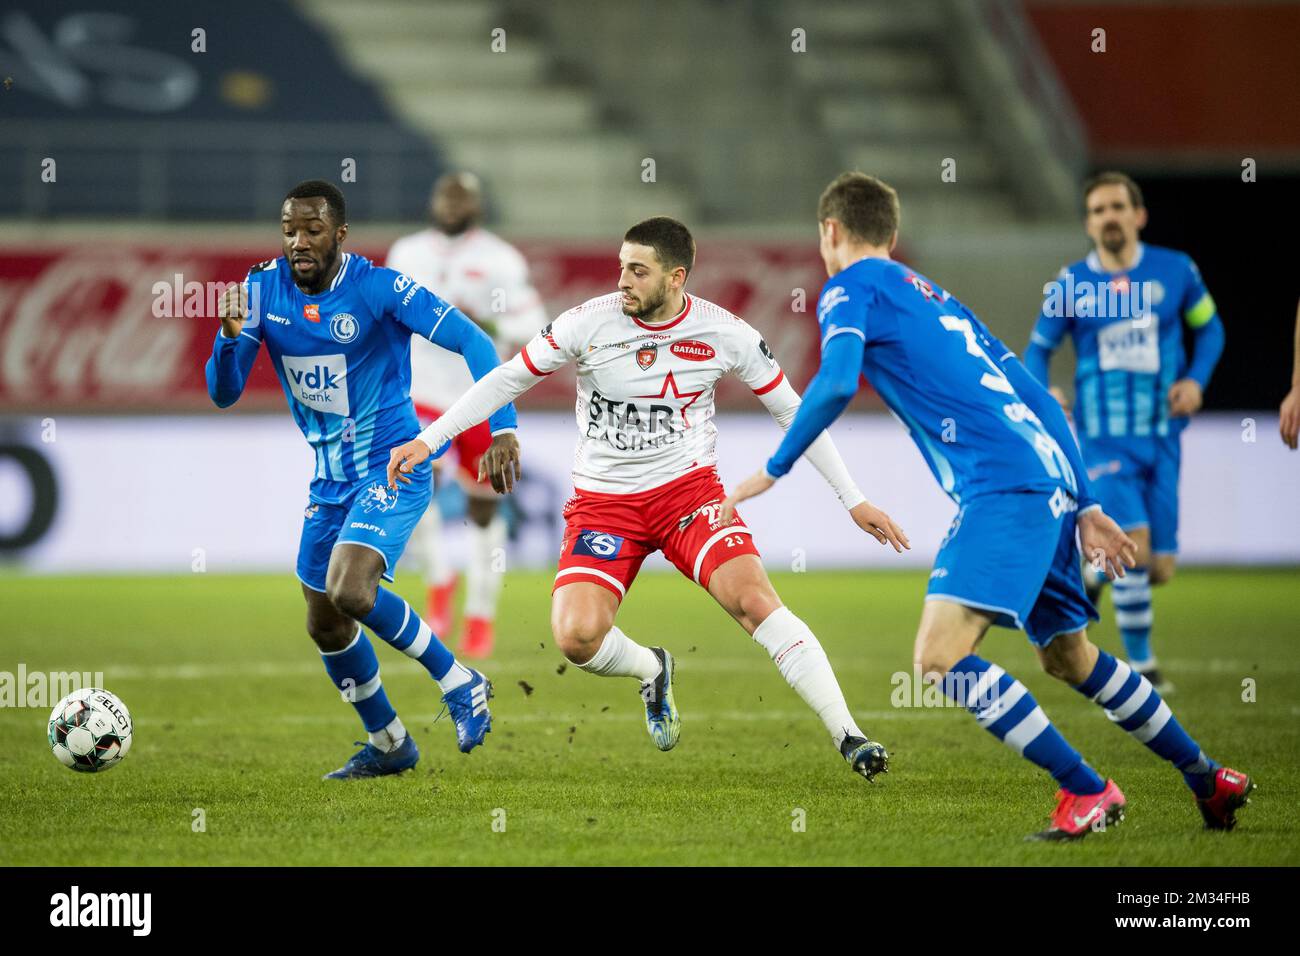 Gent's Elisha Owusu and Mouscron's Bruno Xadas Alexandre Vieira Almeida fight for the ball during a soccer match between KAA Gent and Royal Excel Mouscron, Monday 15 February 2021 in Gent, on day 26 of the 'Jupiler Pro League' first division of the Belgian championship. BELGA PHOTO JASPER JACOBS Stock Photo